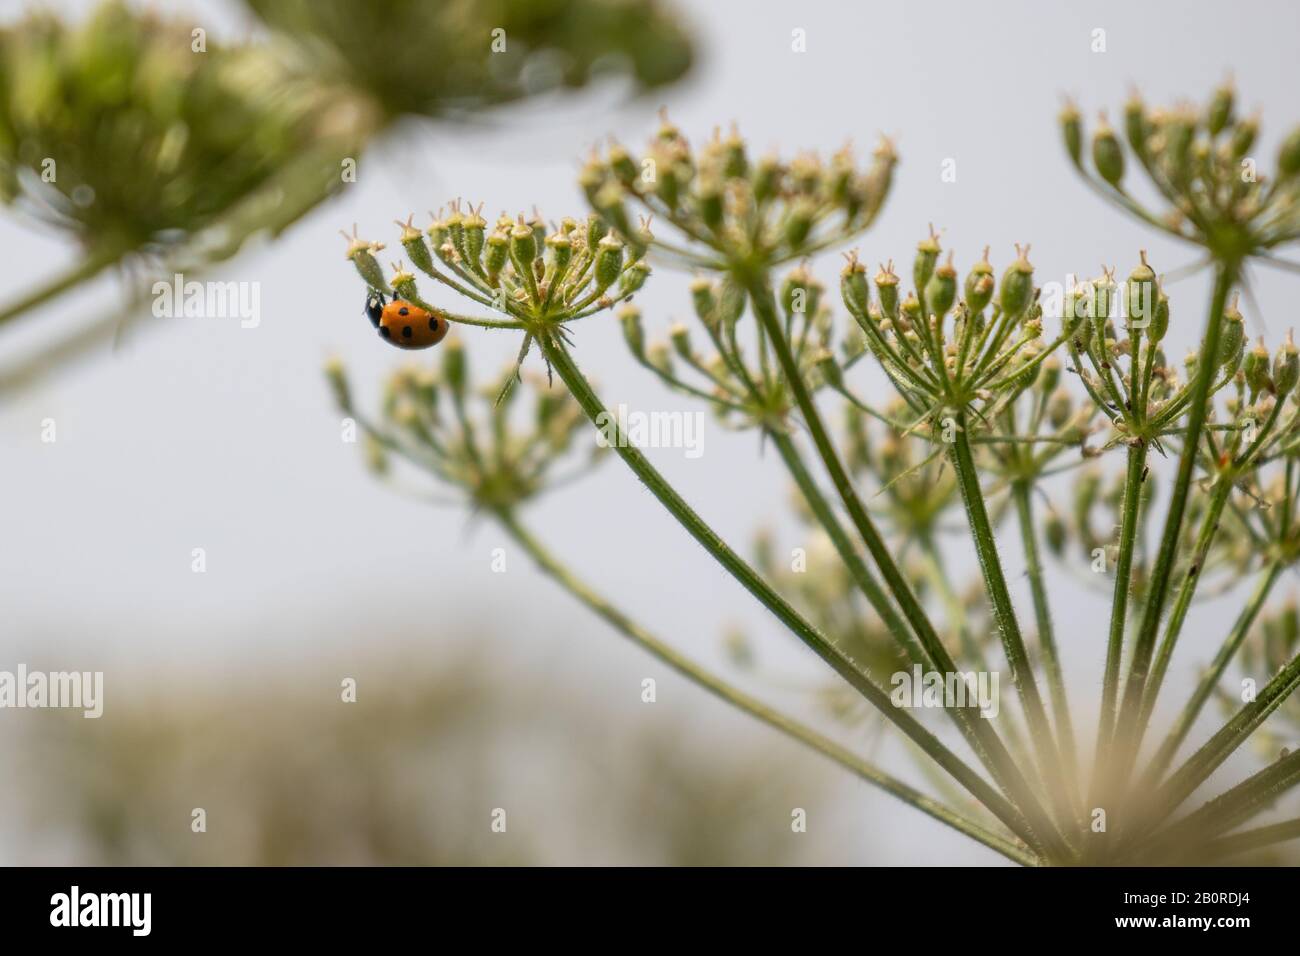 A tiny ladybird climbing up a delicate flower stem in the summer sunshine Stock Photo